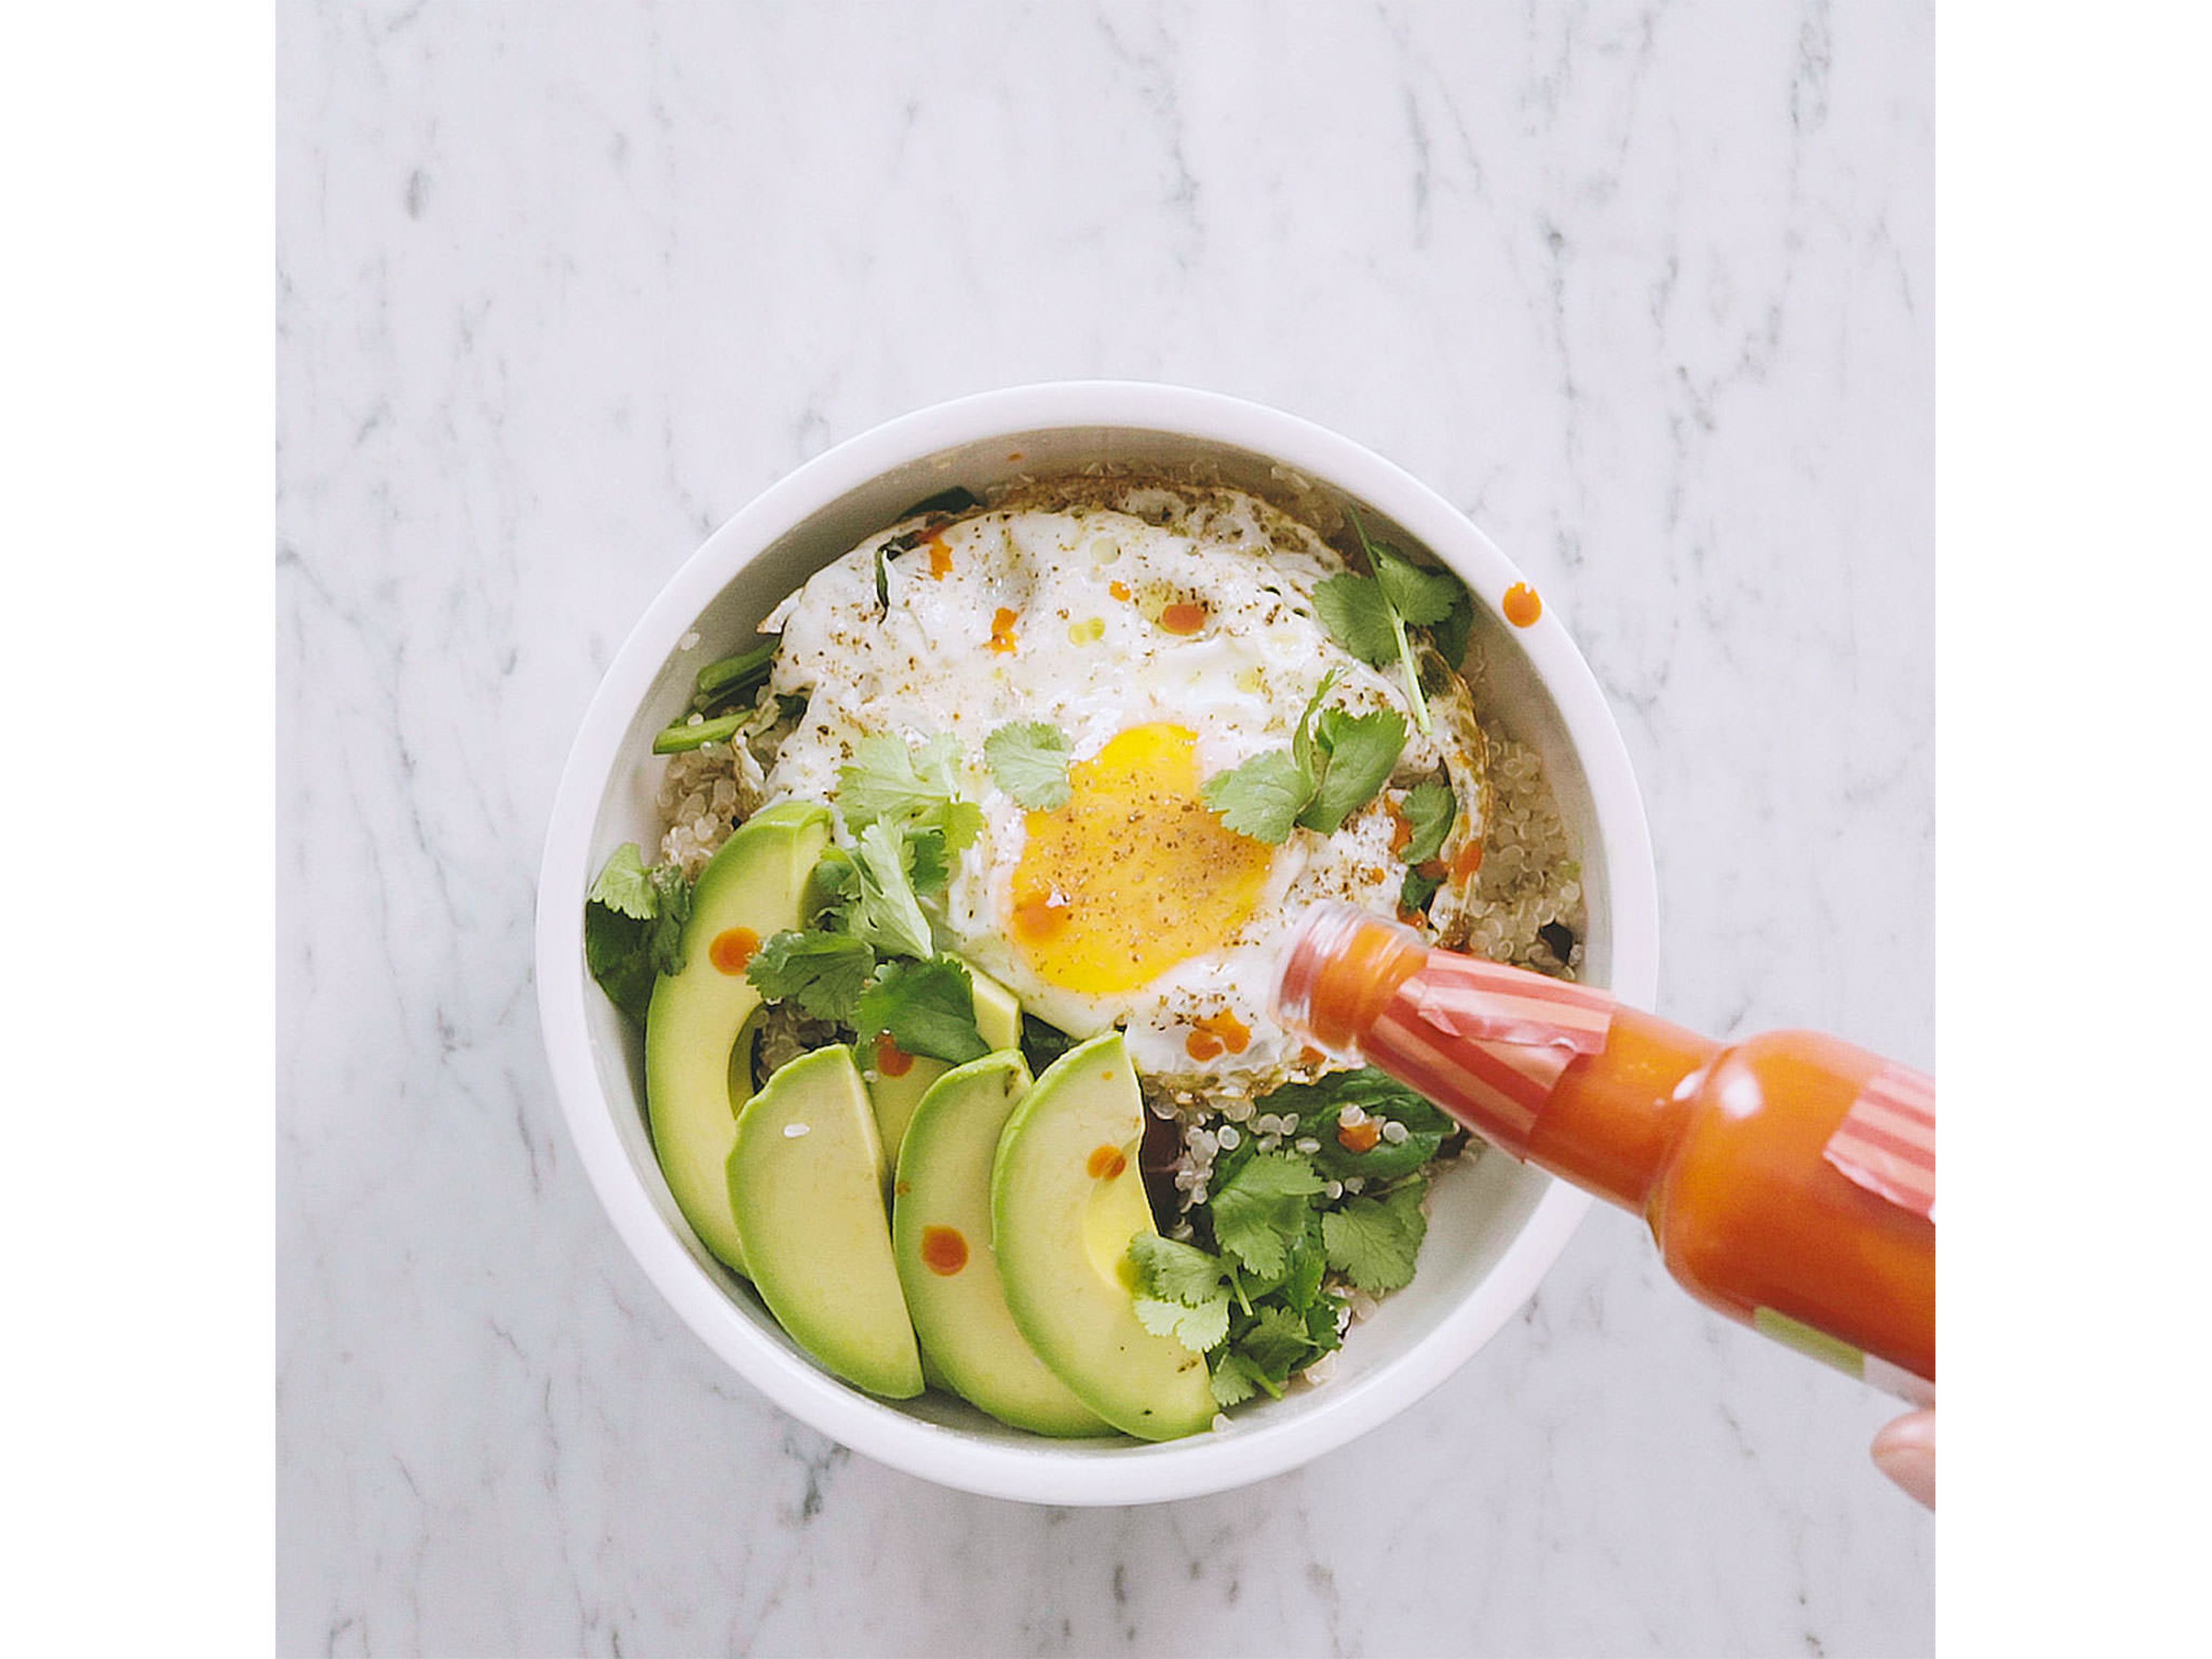 Remove garlic clove and cilantro stems from quinoa mixture and transfer mixture to a serving bowl. Top with avocado slices, fried egg, and cilantro leaves. Serve with hot sauce to taste.